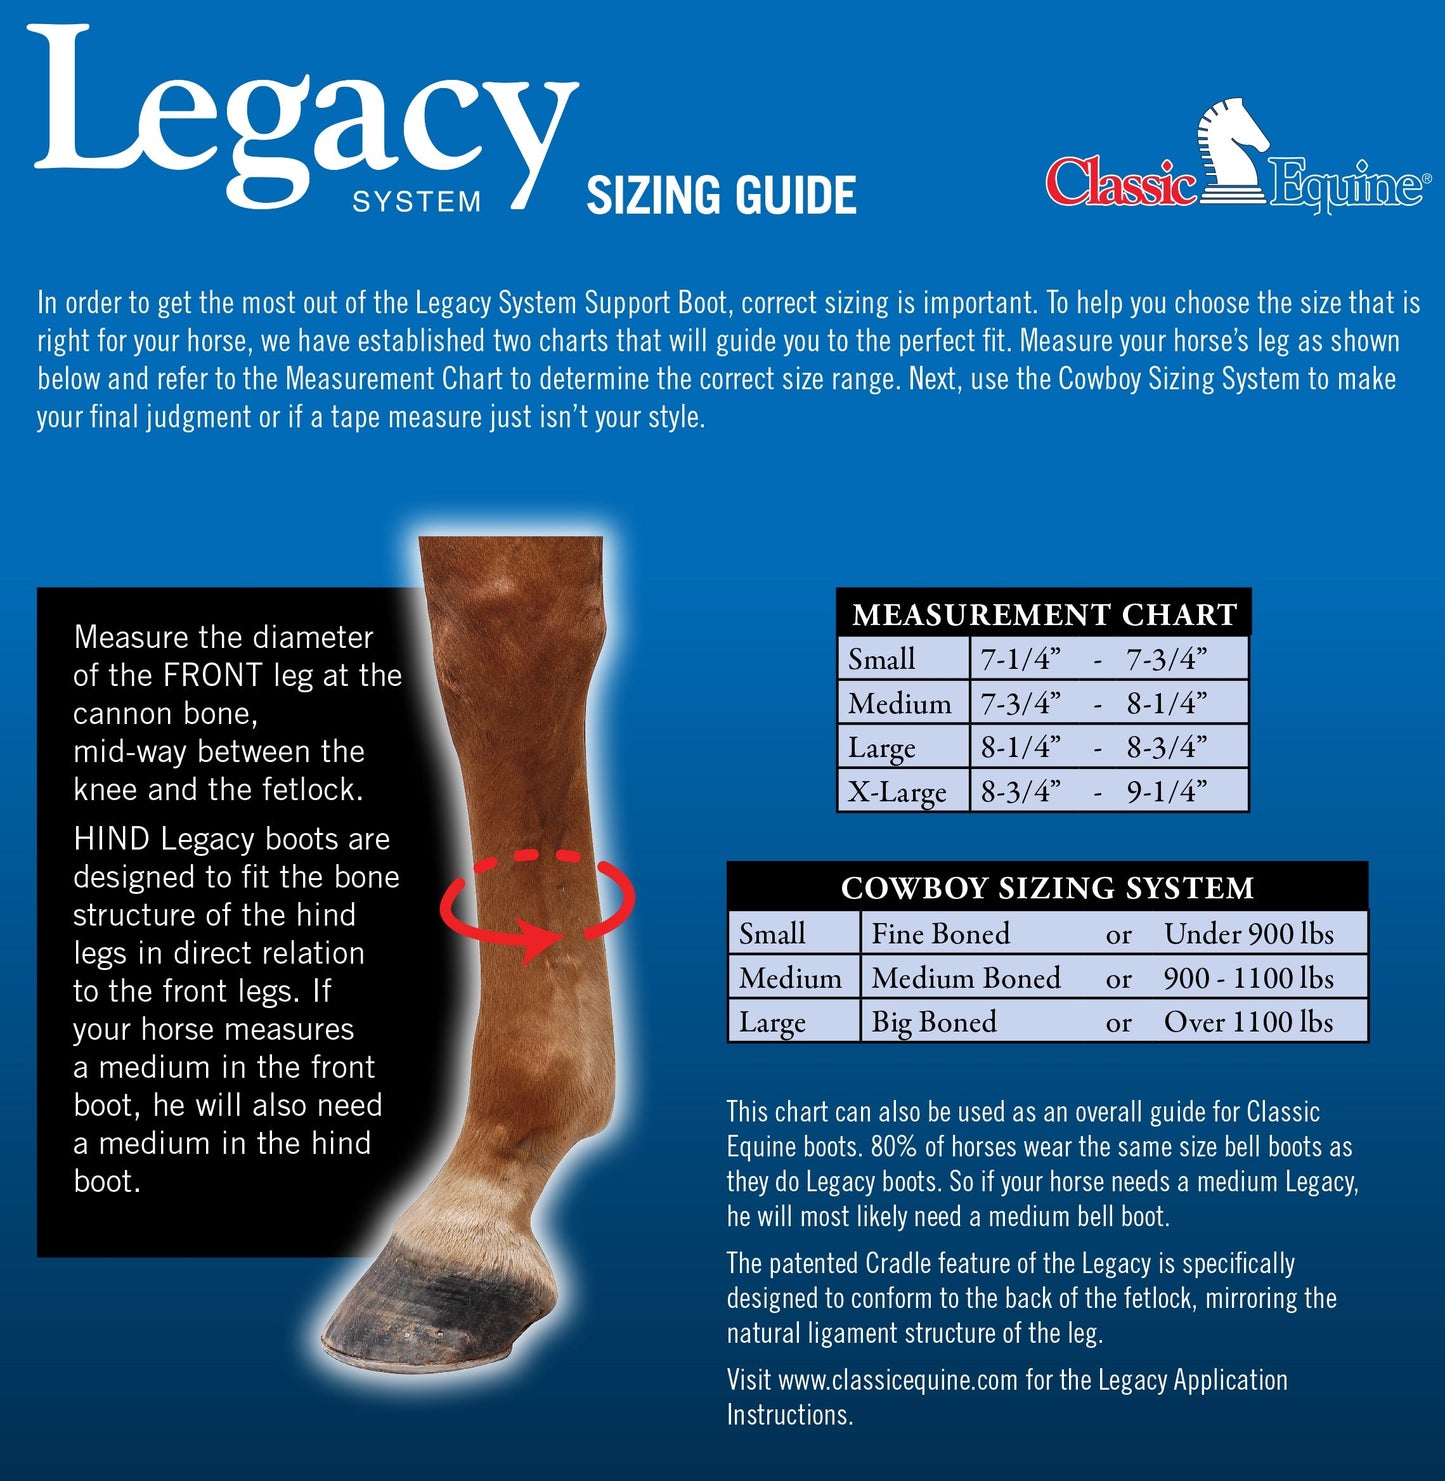 Classic Equine Legacy 2 boots - Blue